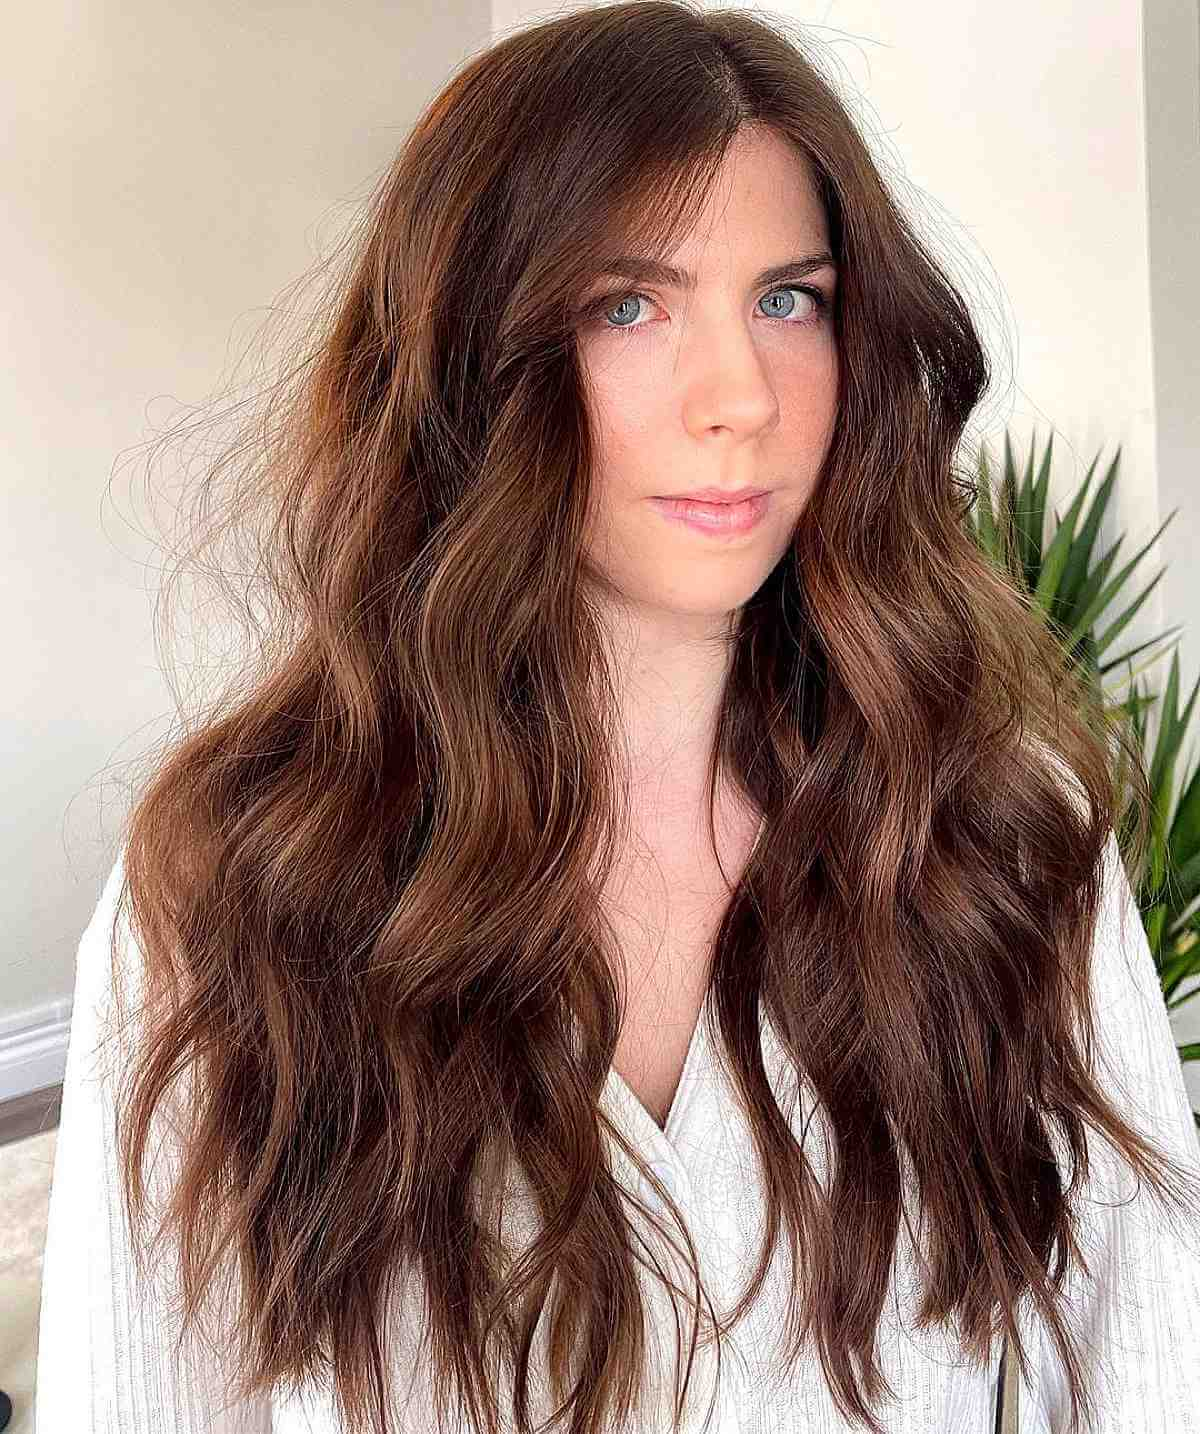 Middle-Parted Long Chocolate Brown Hair